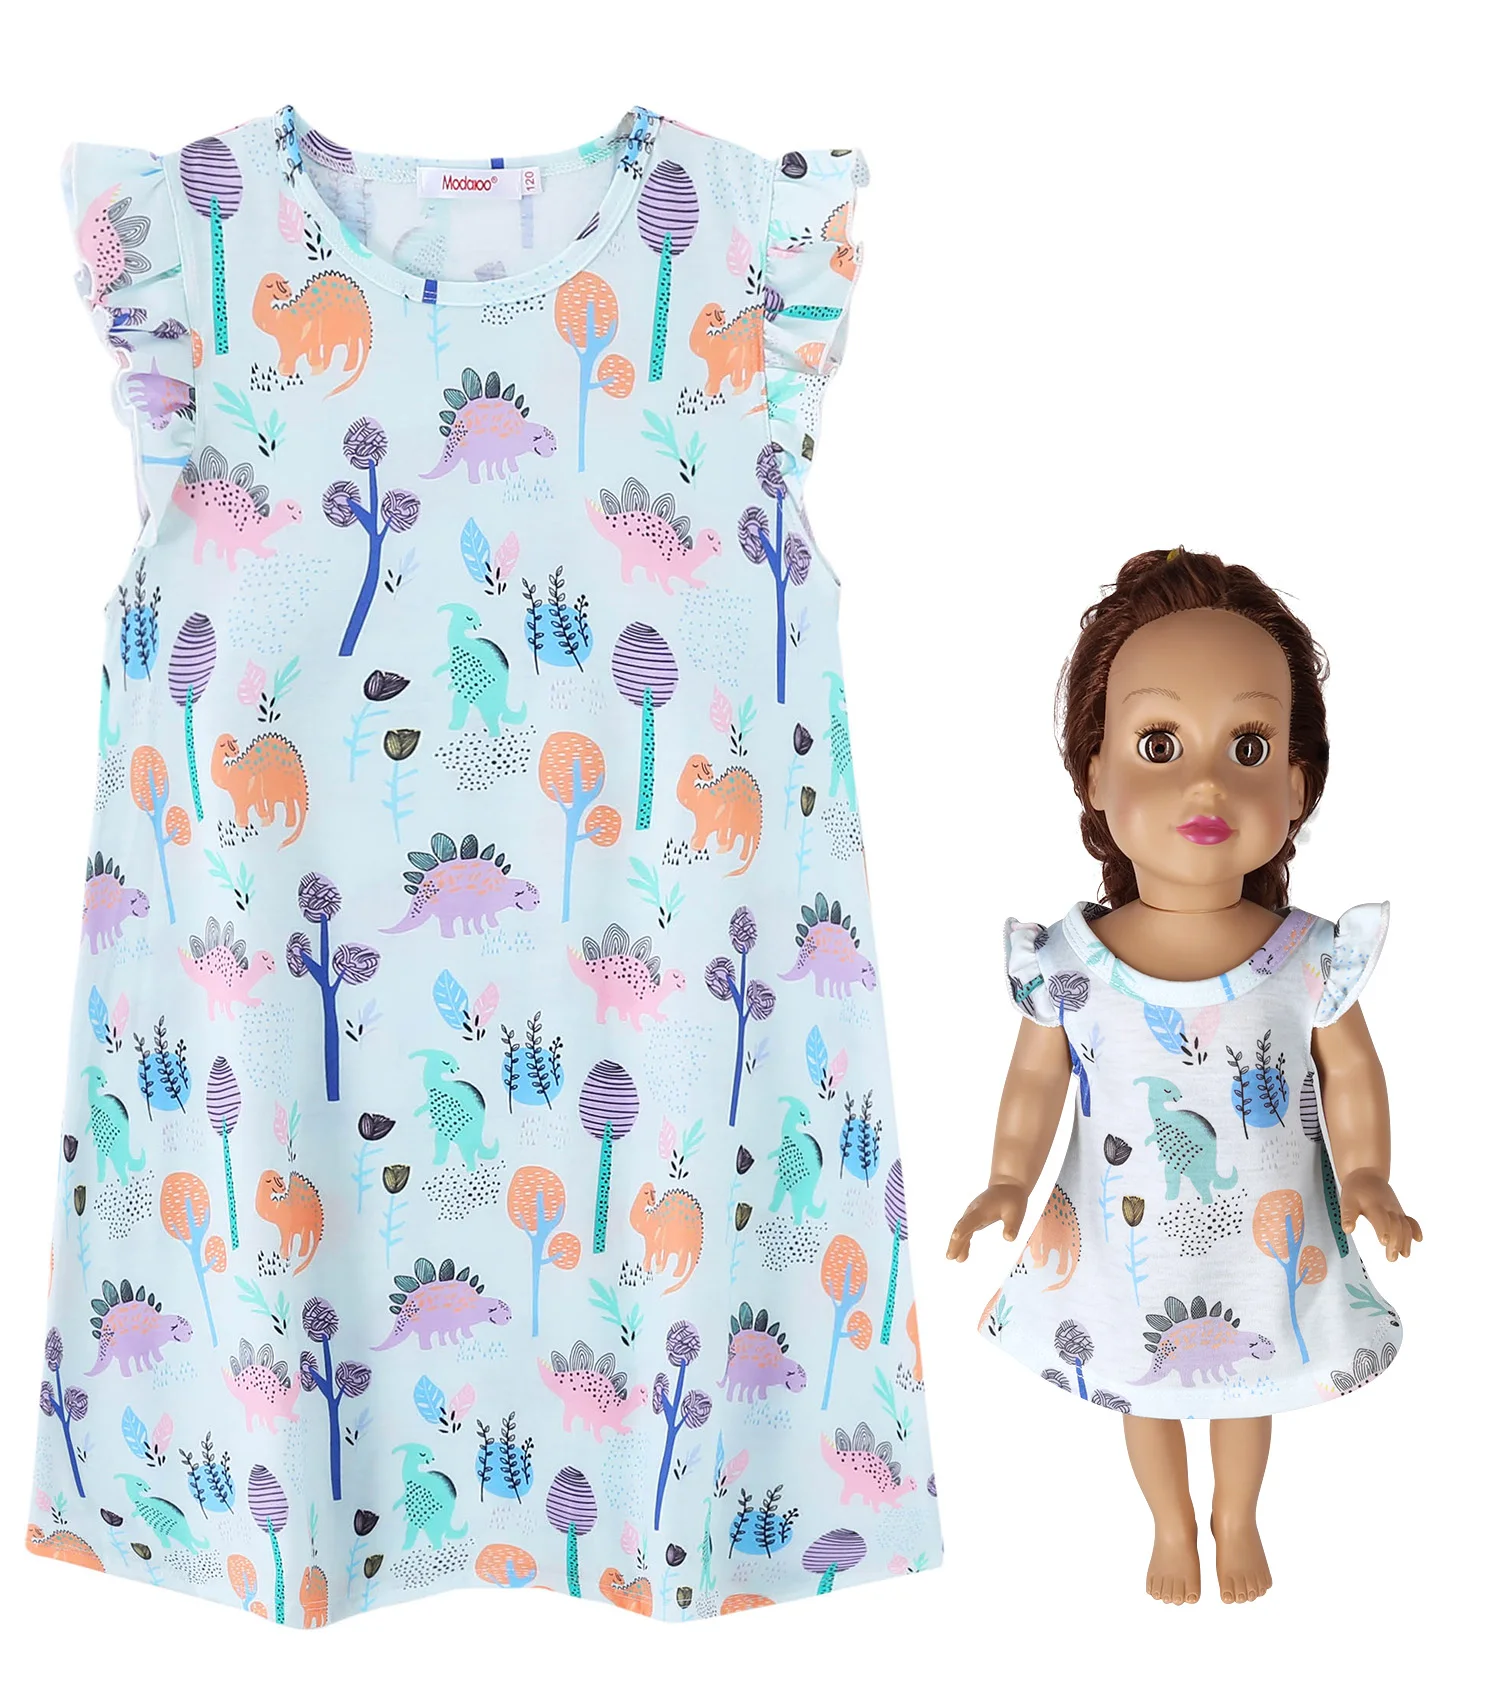 Matching 18 Inch Doll and Girl Dress Toddler Nightdress Short Flutter Sleeve Nightshirts 